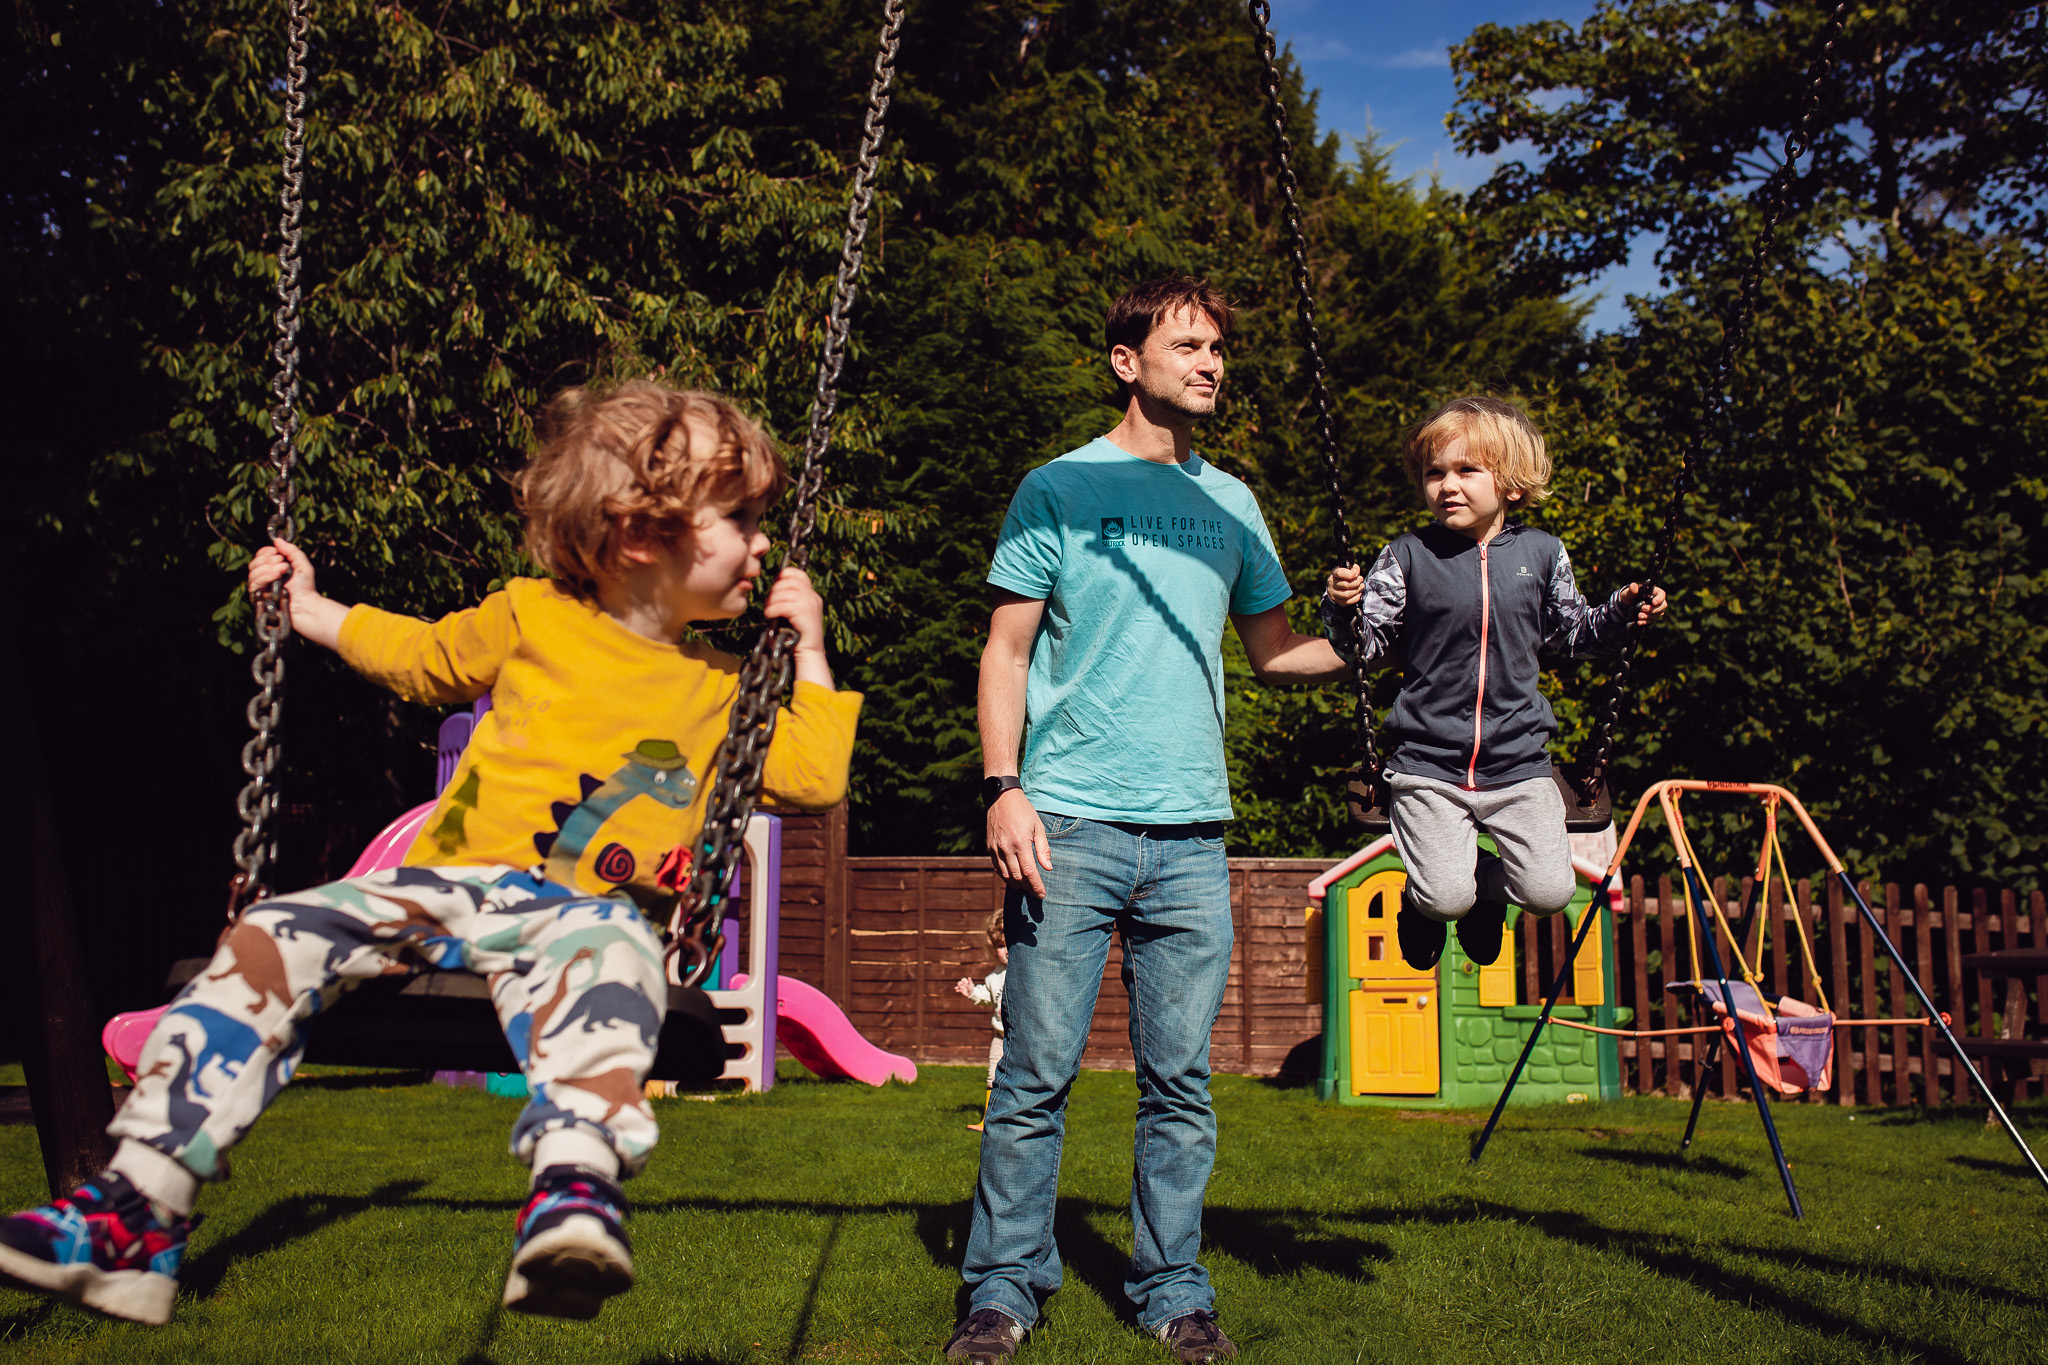 Two young boys being pushed on swings by their dad during a family photo session.